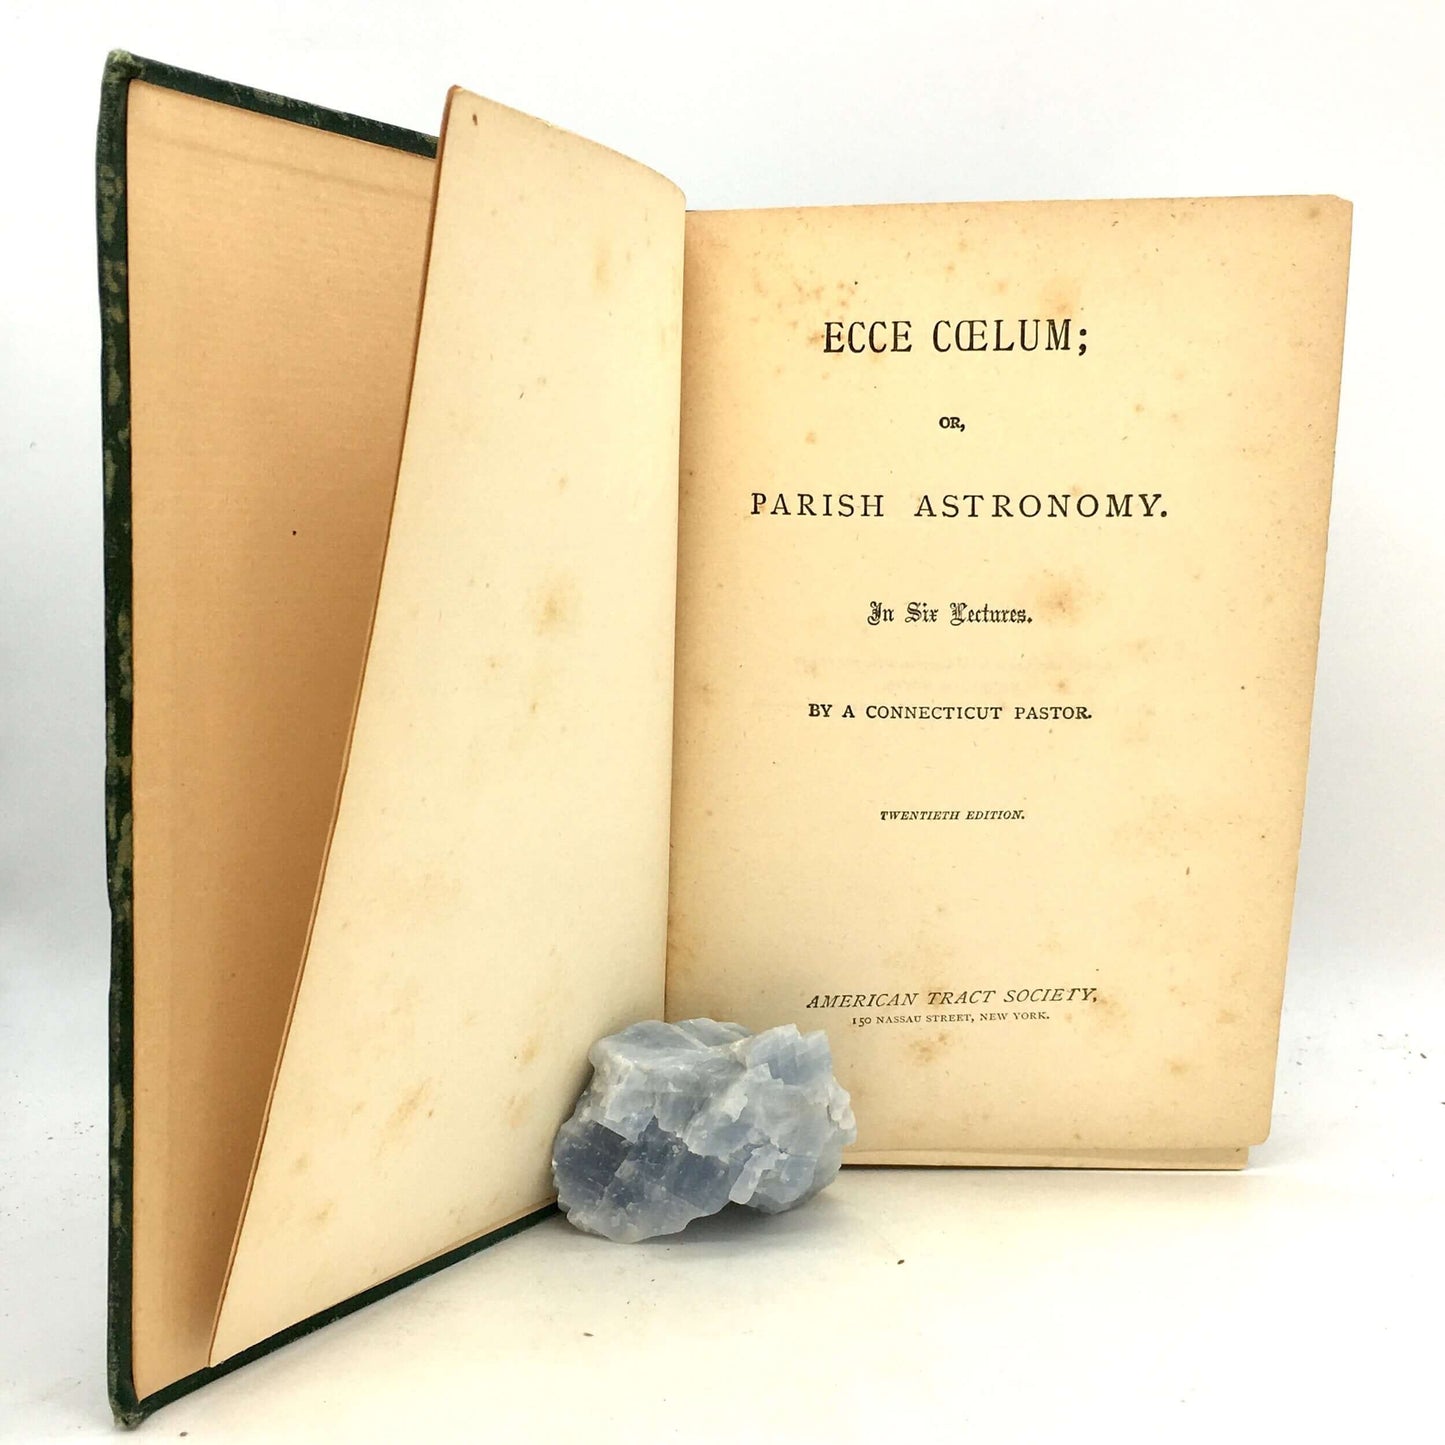 "Ecce Cœlum, or Parish Astronomy In 6 Lectures" by a Connecticut Pastor [American Tract Society, 1867] - Buzz Bookstore